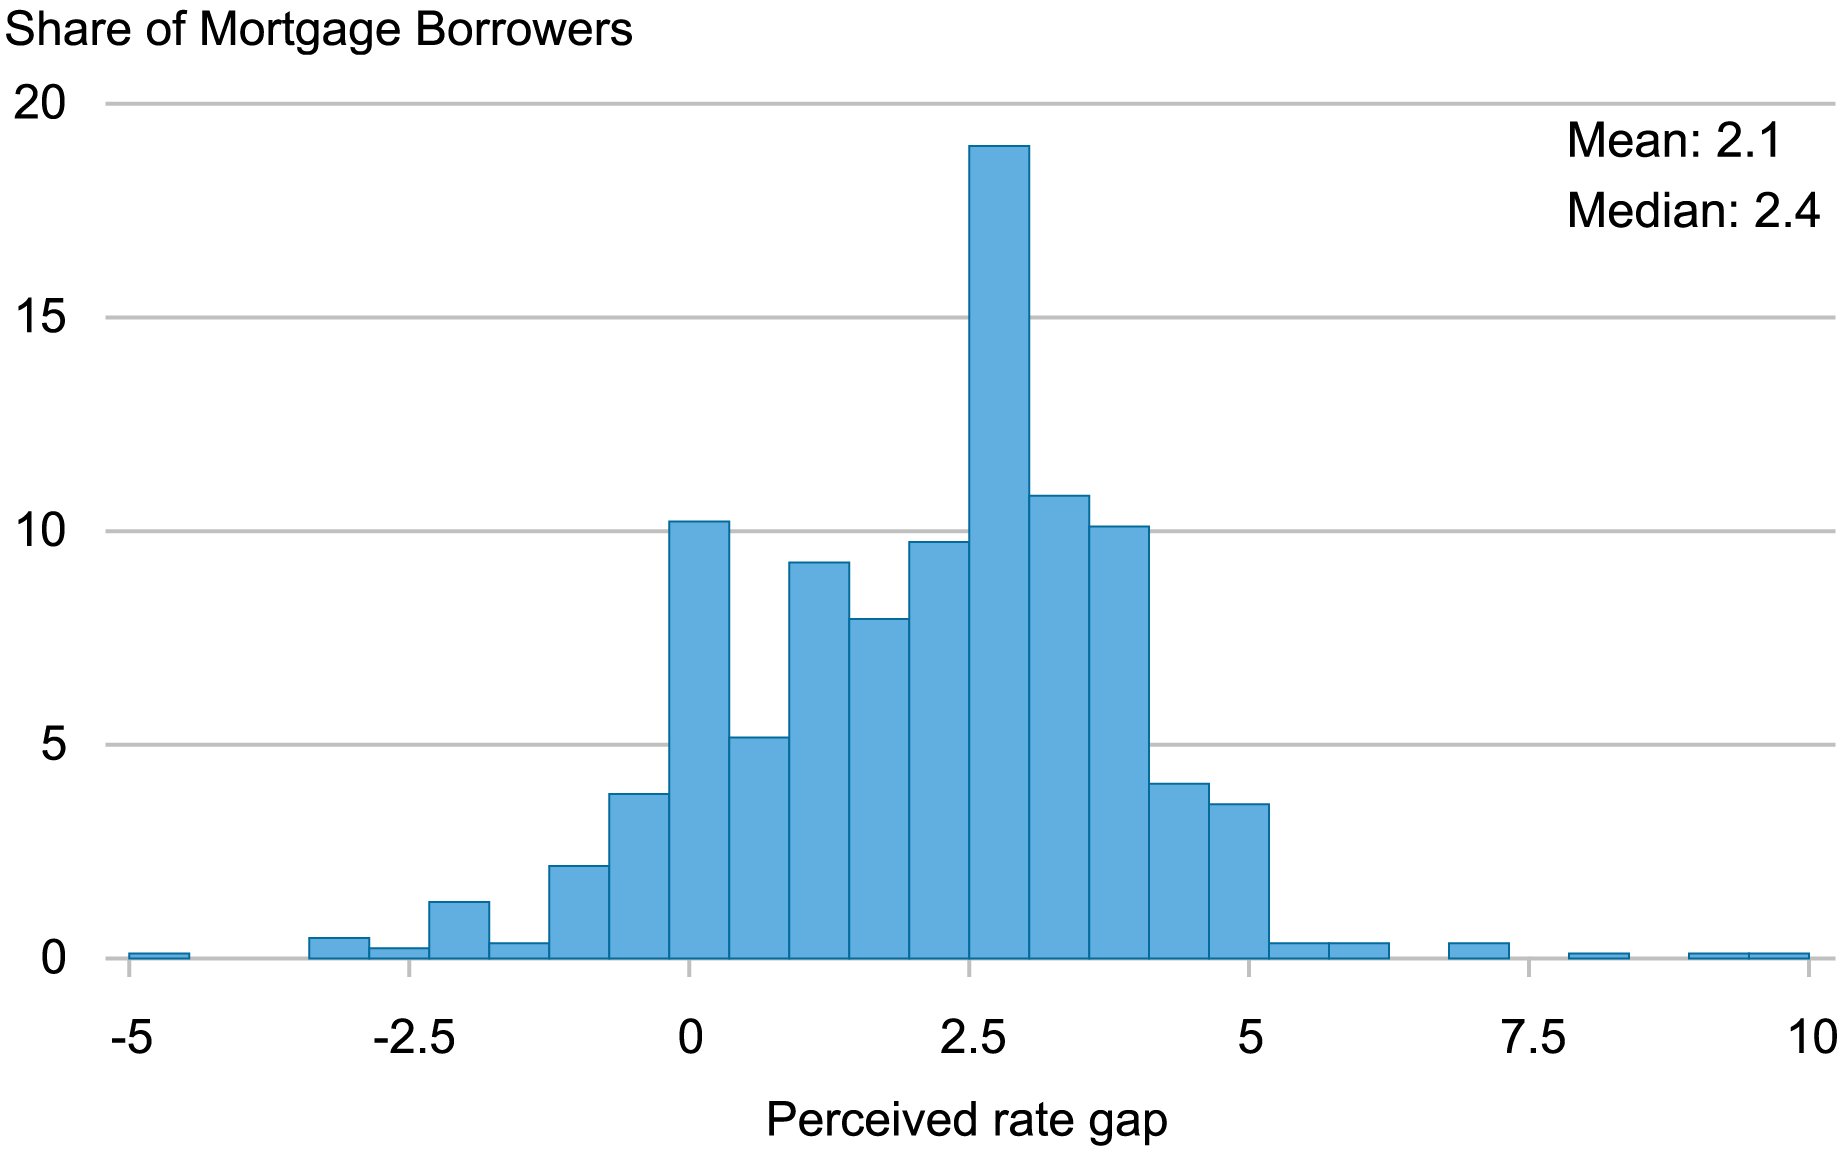 bar chart measuring respondents’ perceived mortgage rate gap, or the difference between a perceived new mortgage rate today vs. their current mortgage rate; perceived rate gap ranges left-to-right from -5% to 10%, peaking at around 2.5 percentage points.